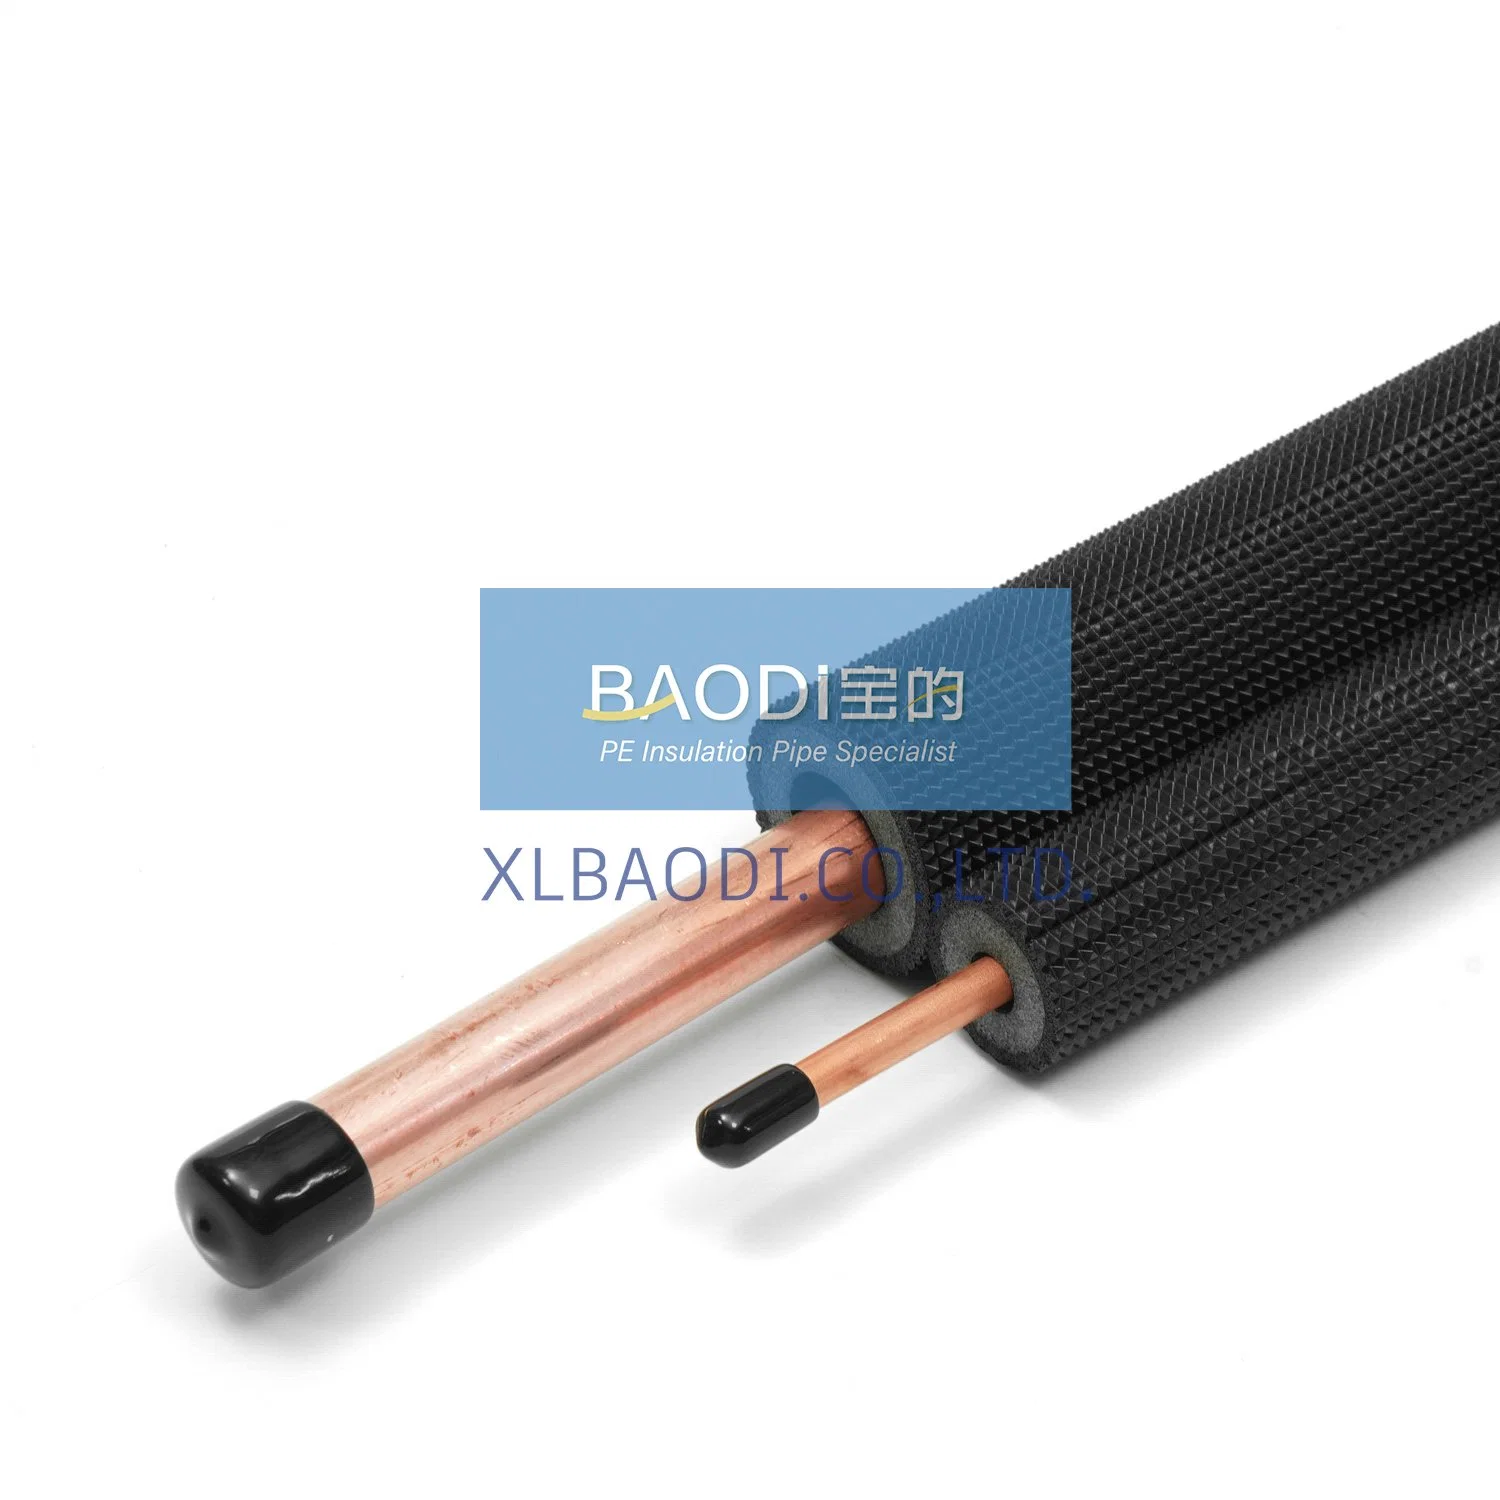 Insulated Copper Wires and Cables European Standard for Air Conditioner Size 1/4, 3/8, 1/2, 5/8, 3/4, 7/8 Installation Pair Coil AC Parts